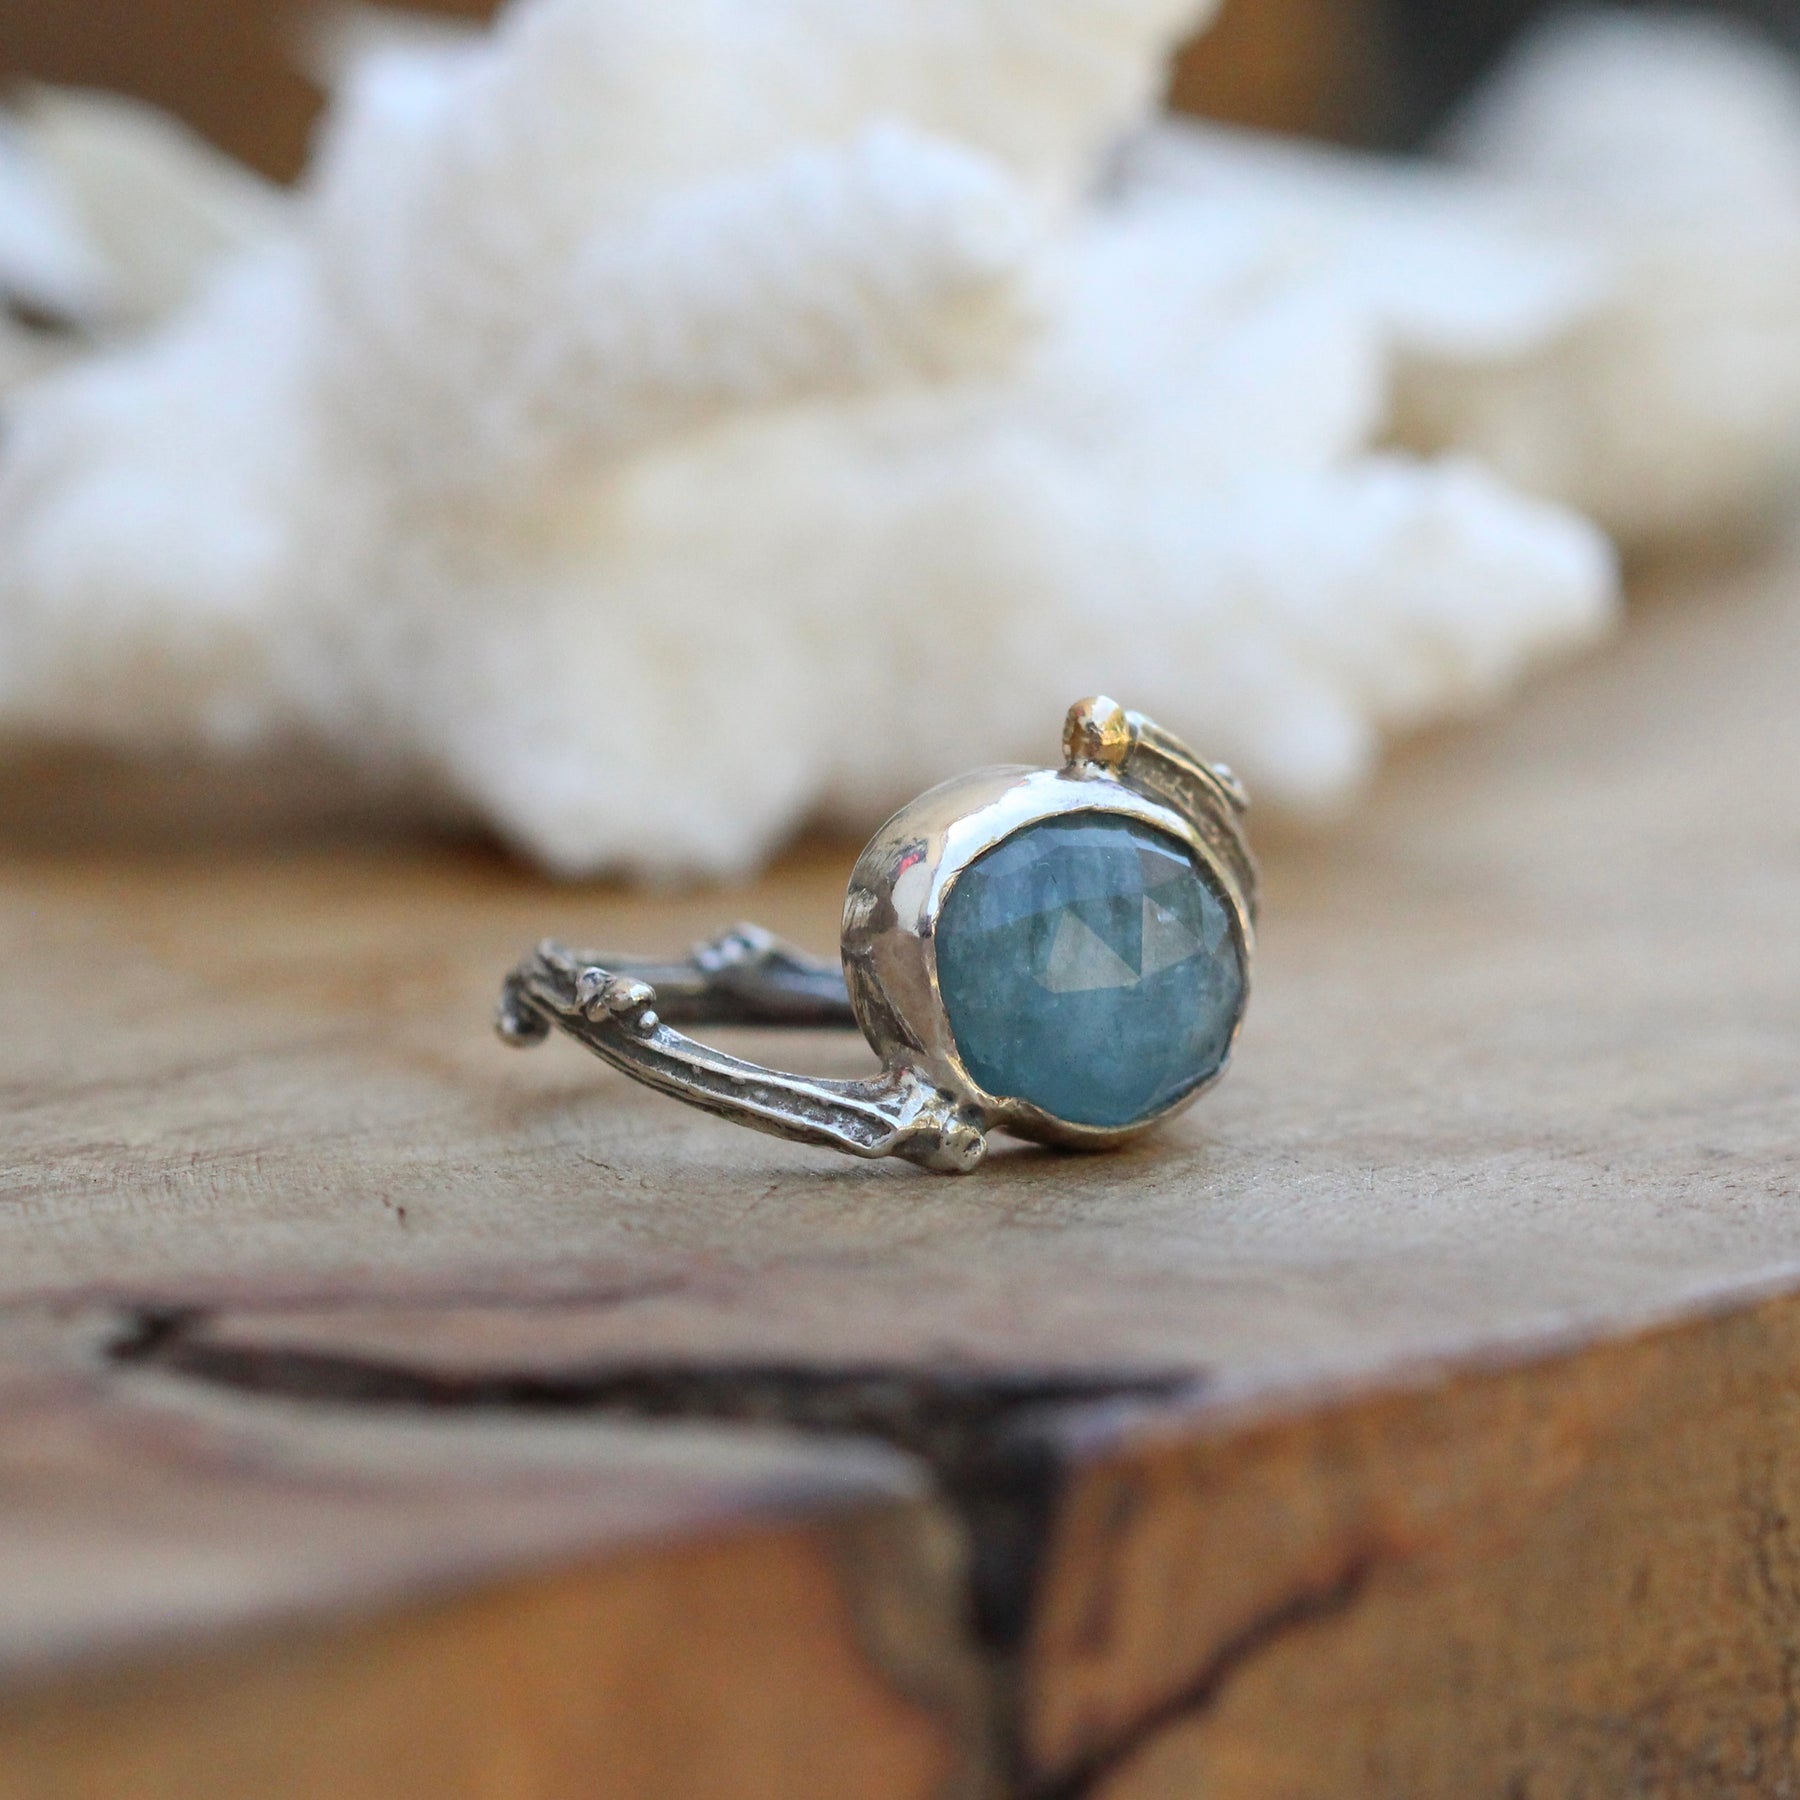 Clearance Sale    Aquamarine and sterling silver branch ring with 14k gold accent